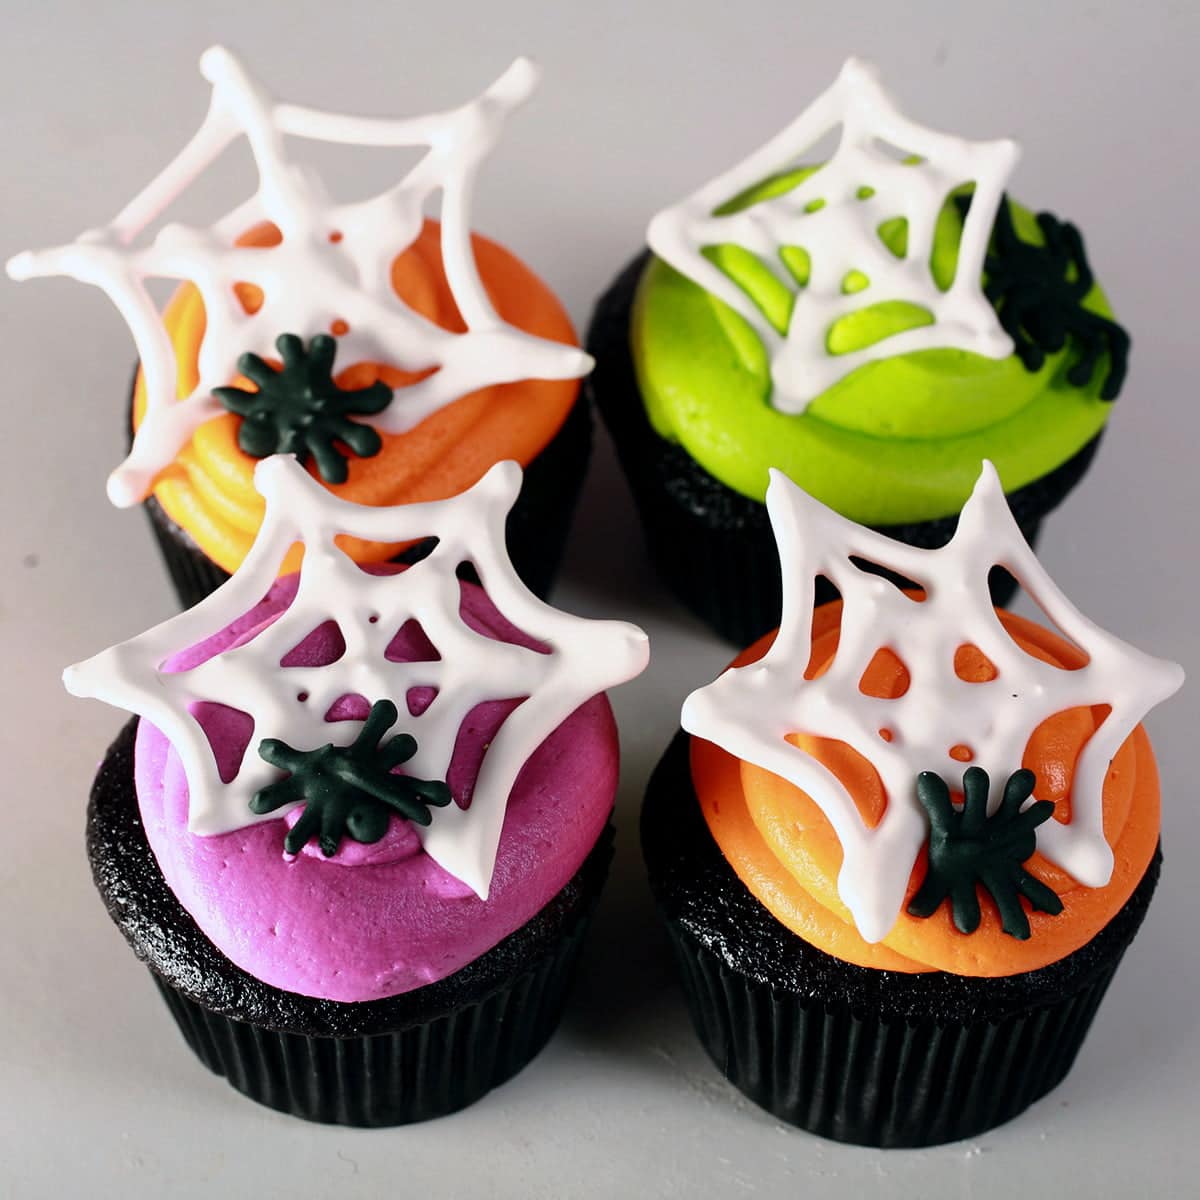 4 black velvet cupcakes frosted with brightly coloured icing - lime green, electric purple, and orange - are shown topped with royal icing spider webs and spiders.